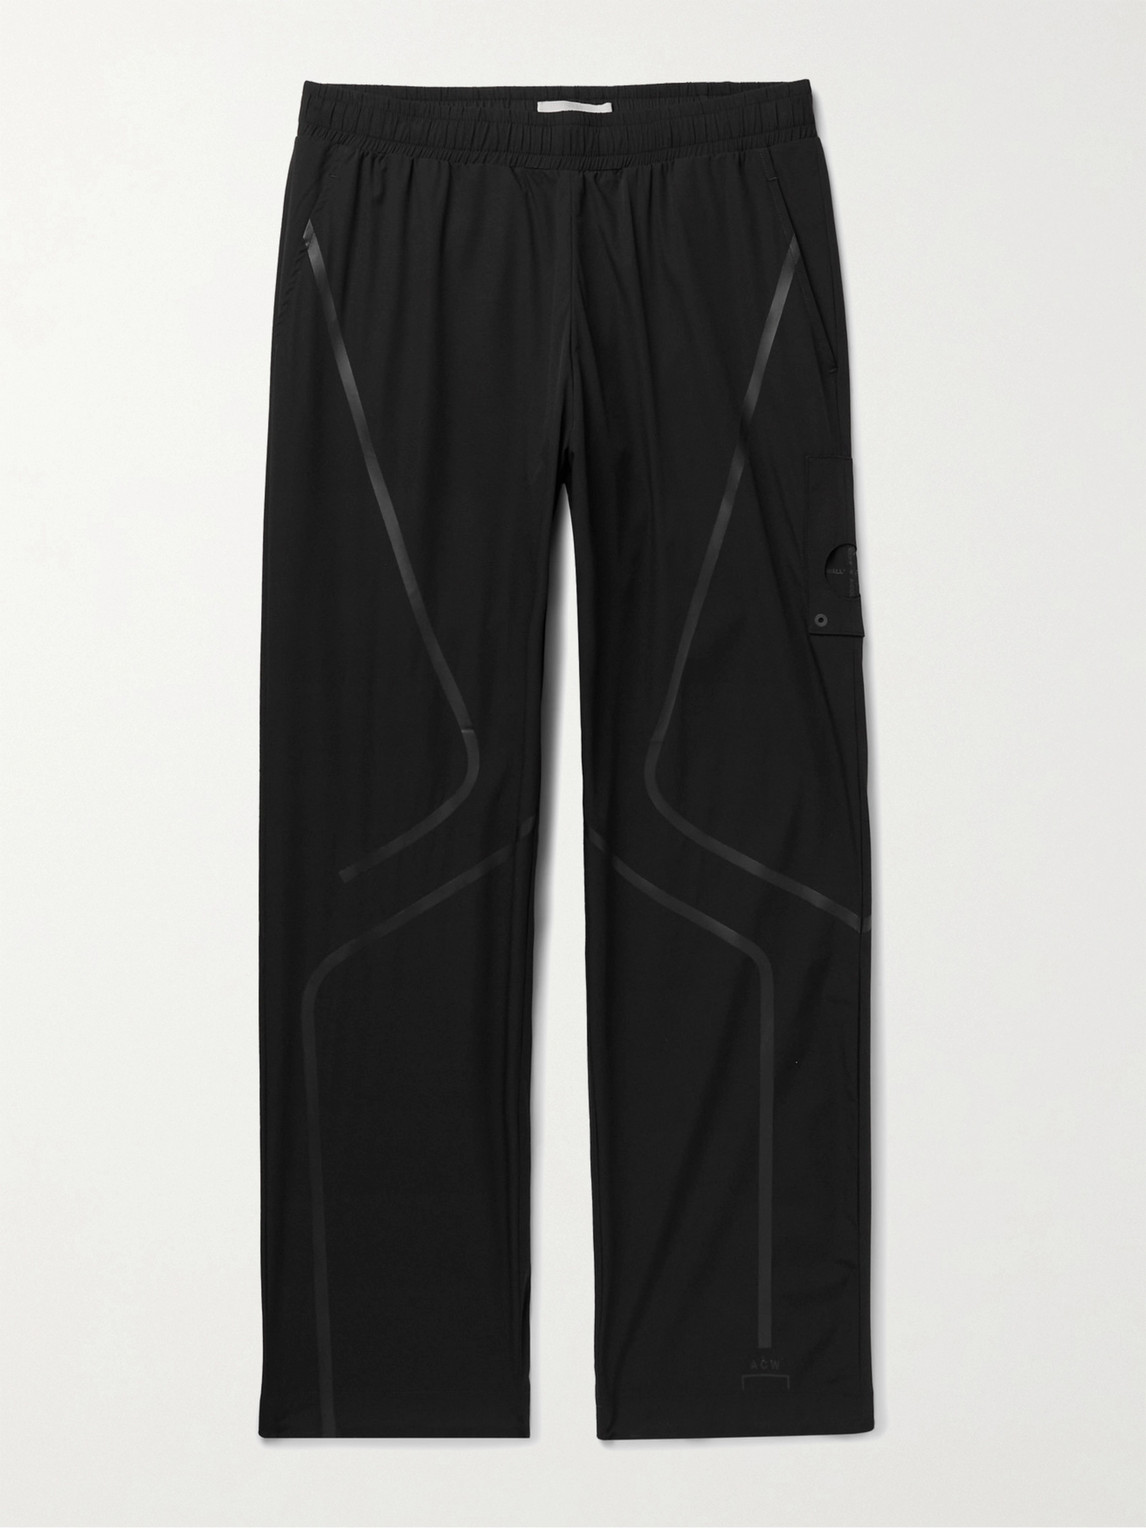 A-COLD-WALL* WELDED STRETCH-SHELL TROUSERS